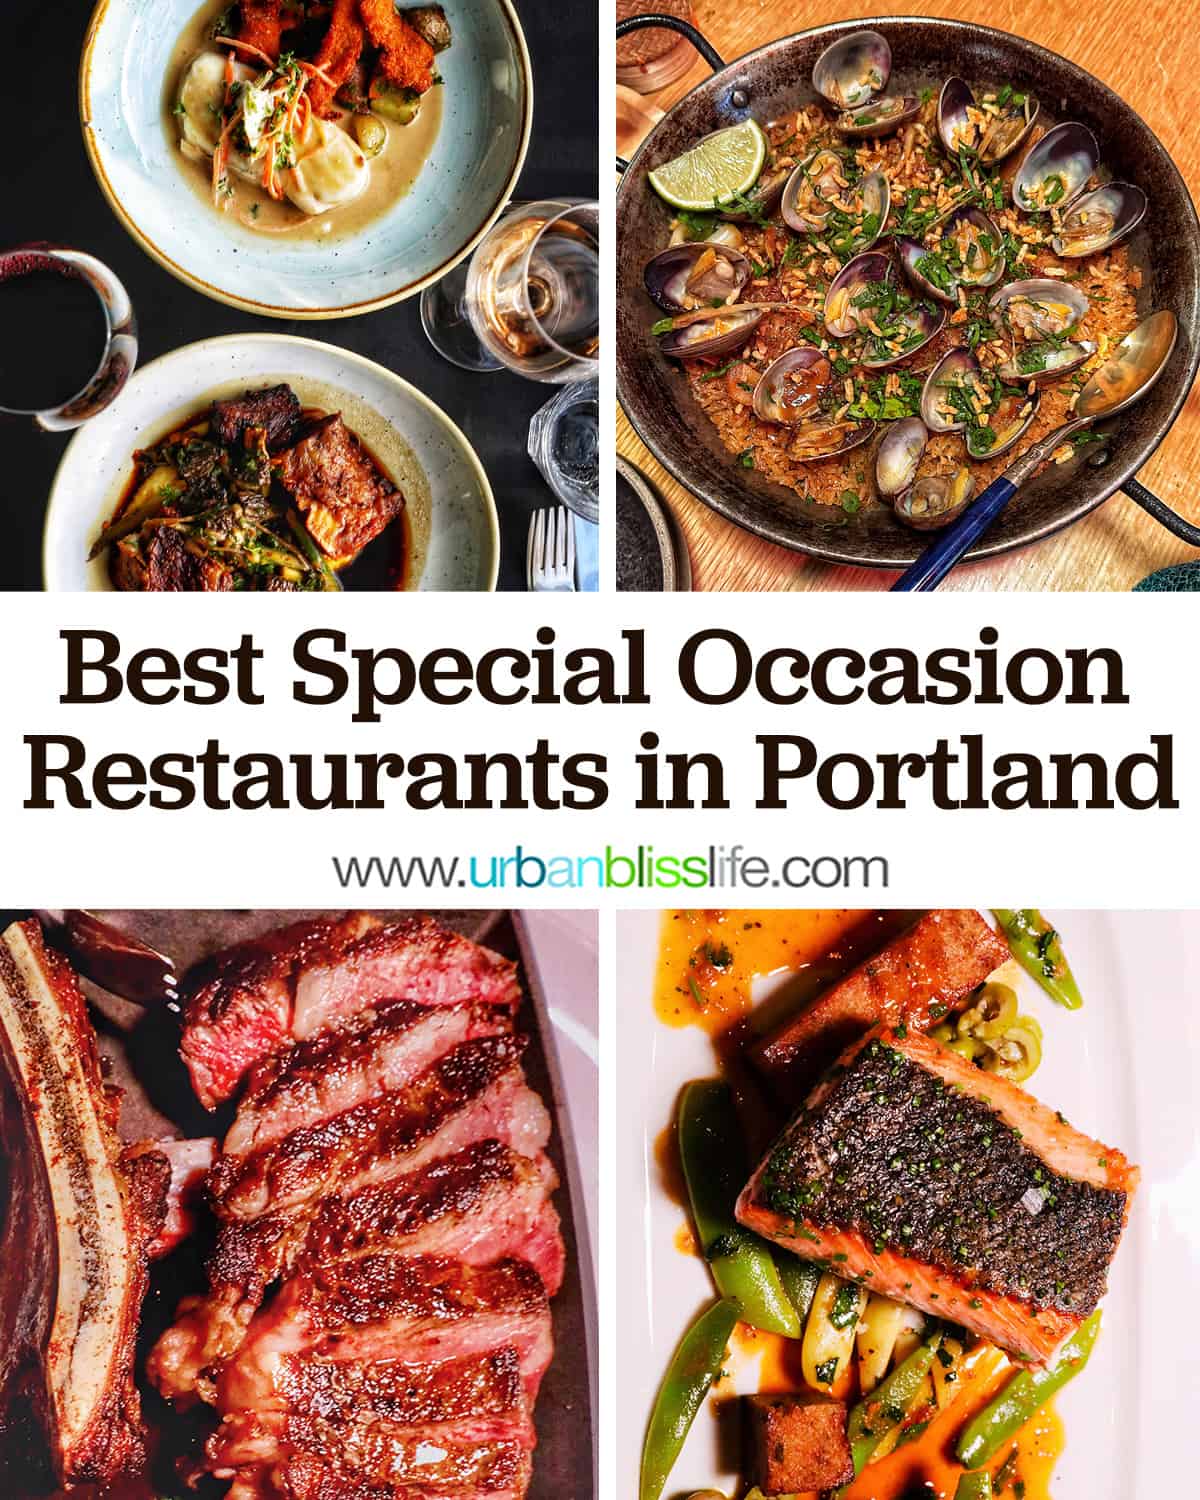 four photos of elegant steak, fish, and paella dishes with title text that reads "Best Special Occasion Restaurants in Portland."